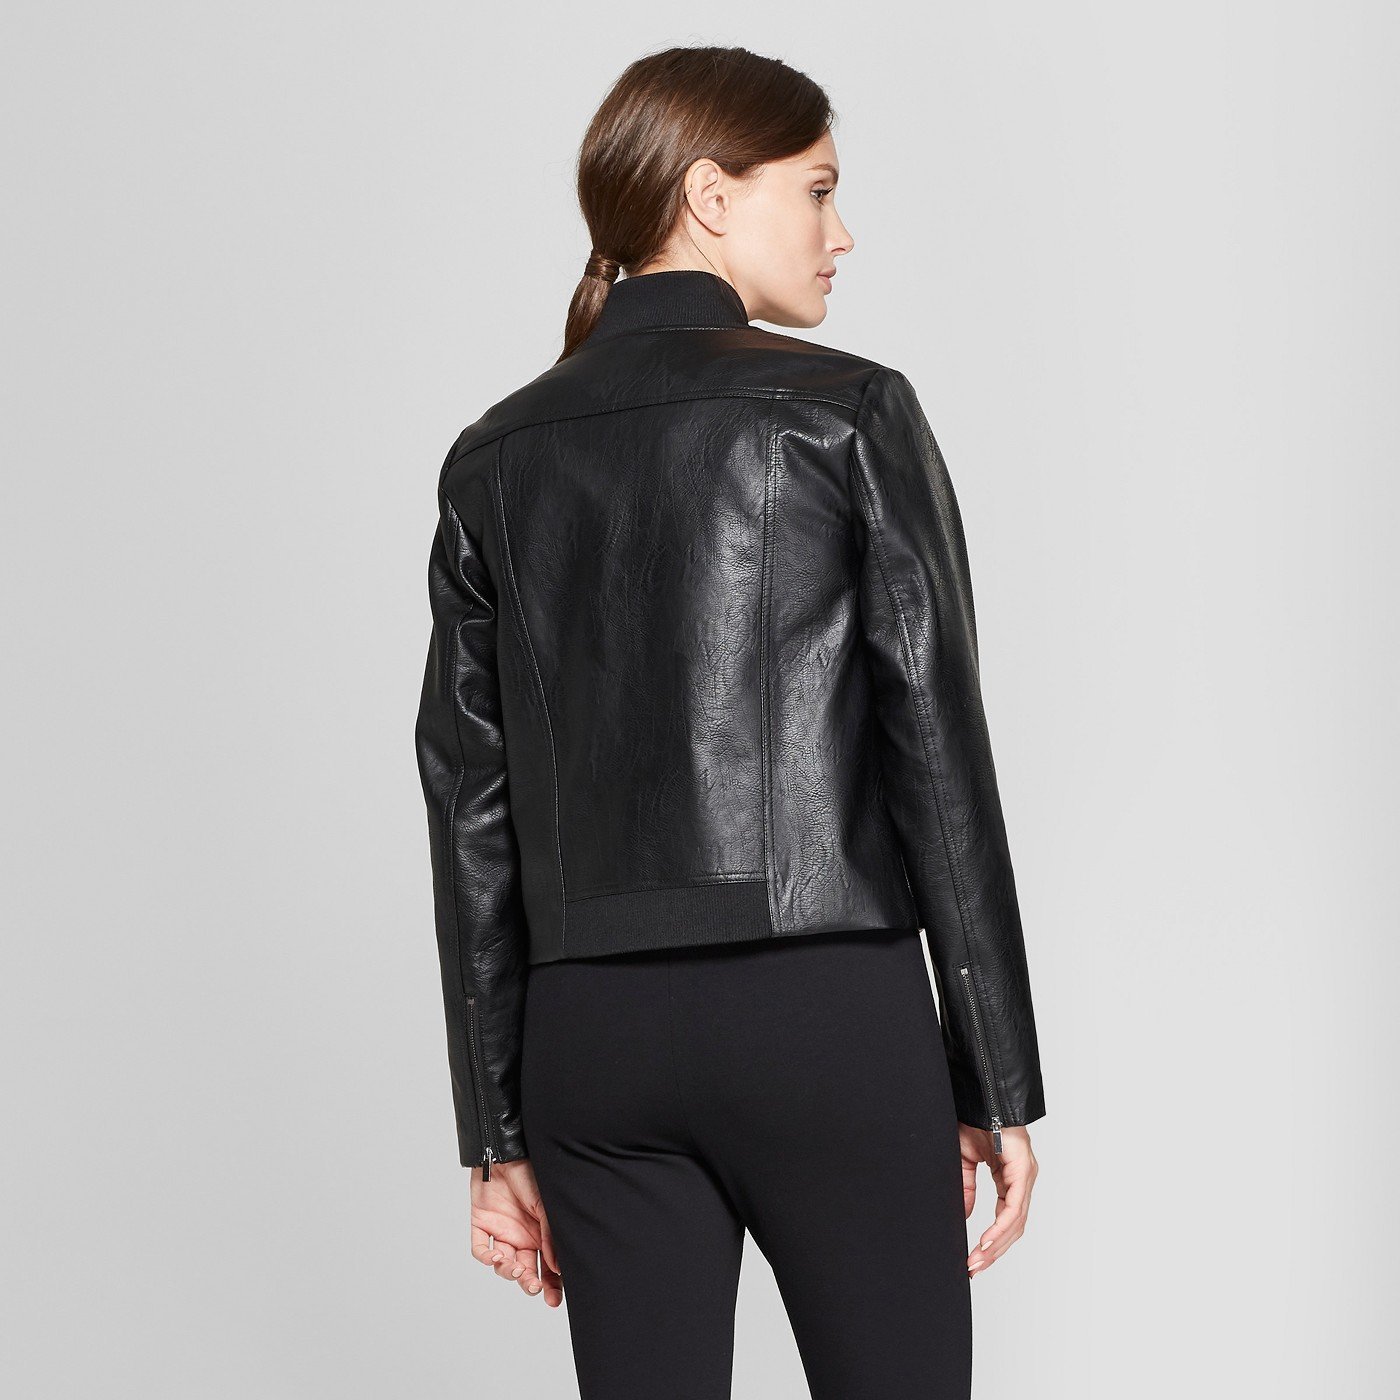 target womens leather jacket